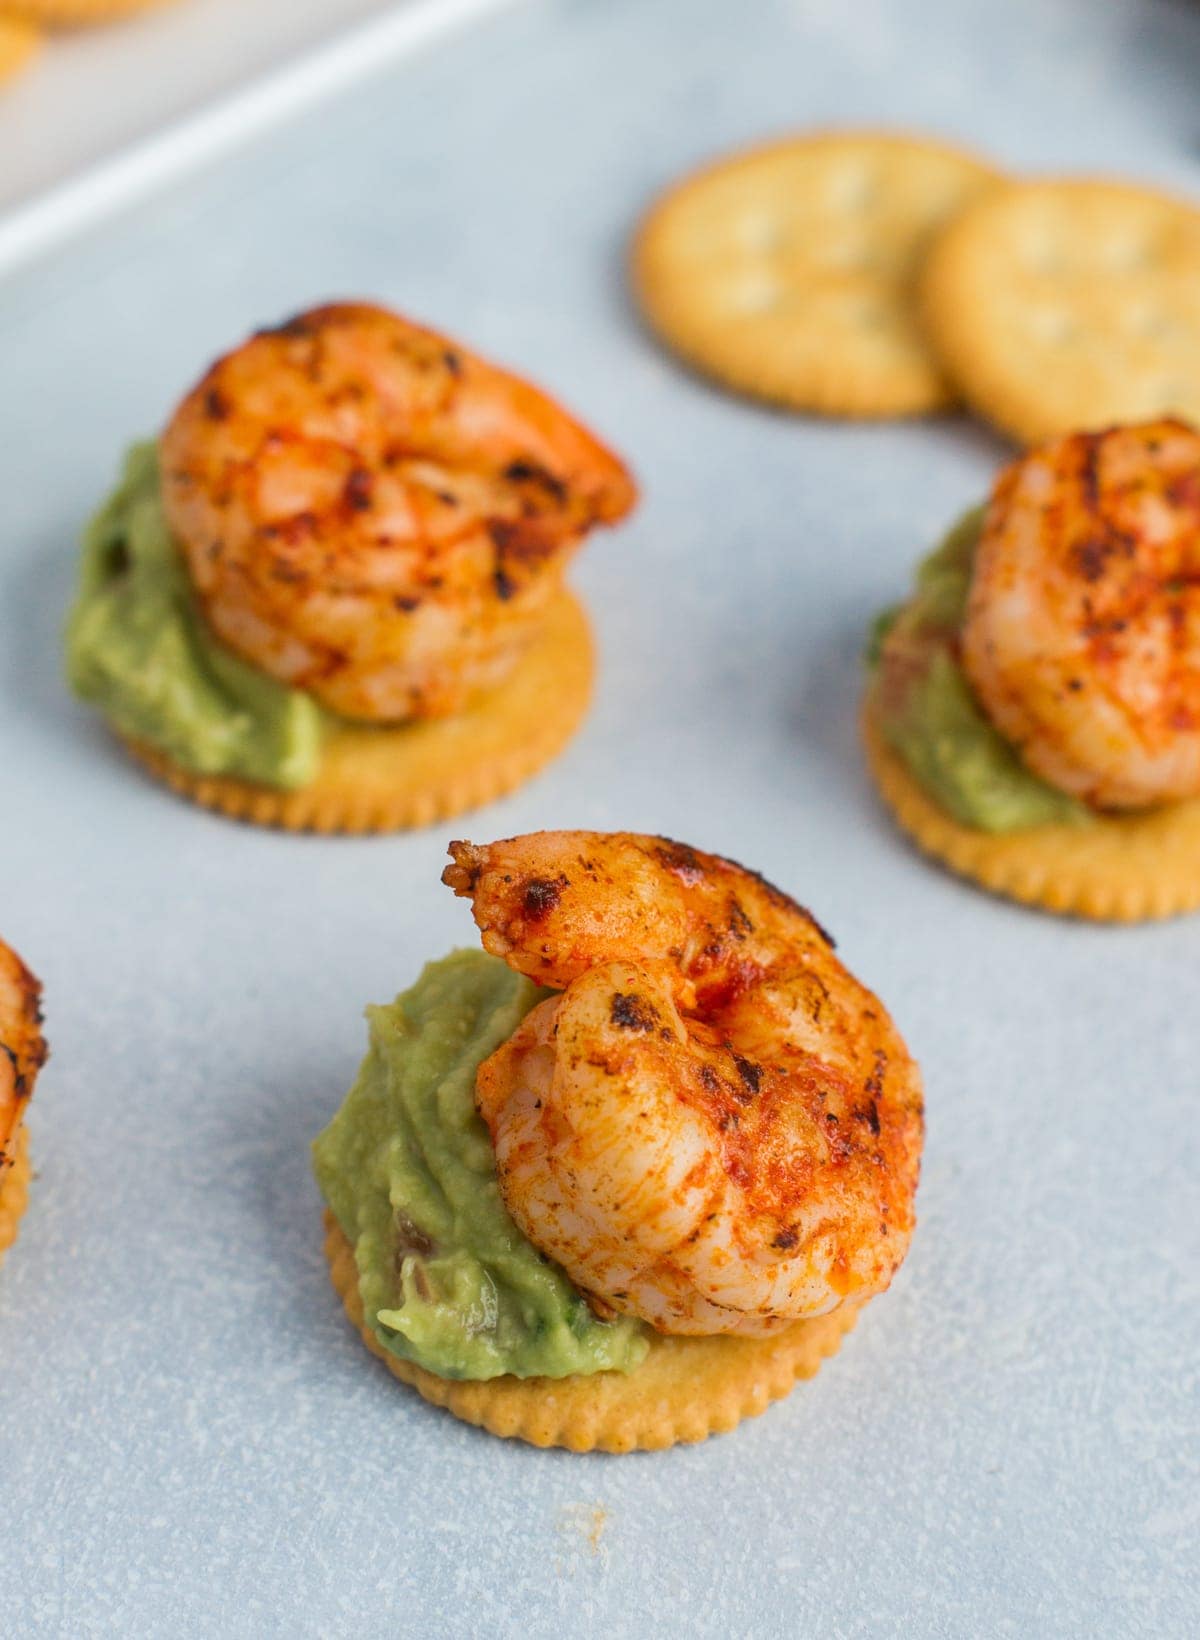 Spicy Shrimp and Guacamole Bites - My Dominican Kitchen